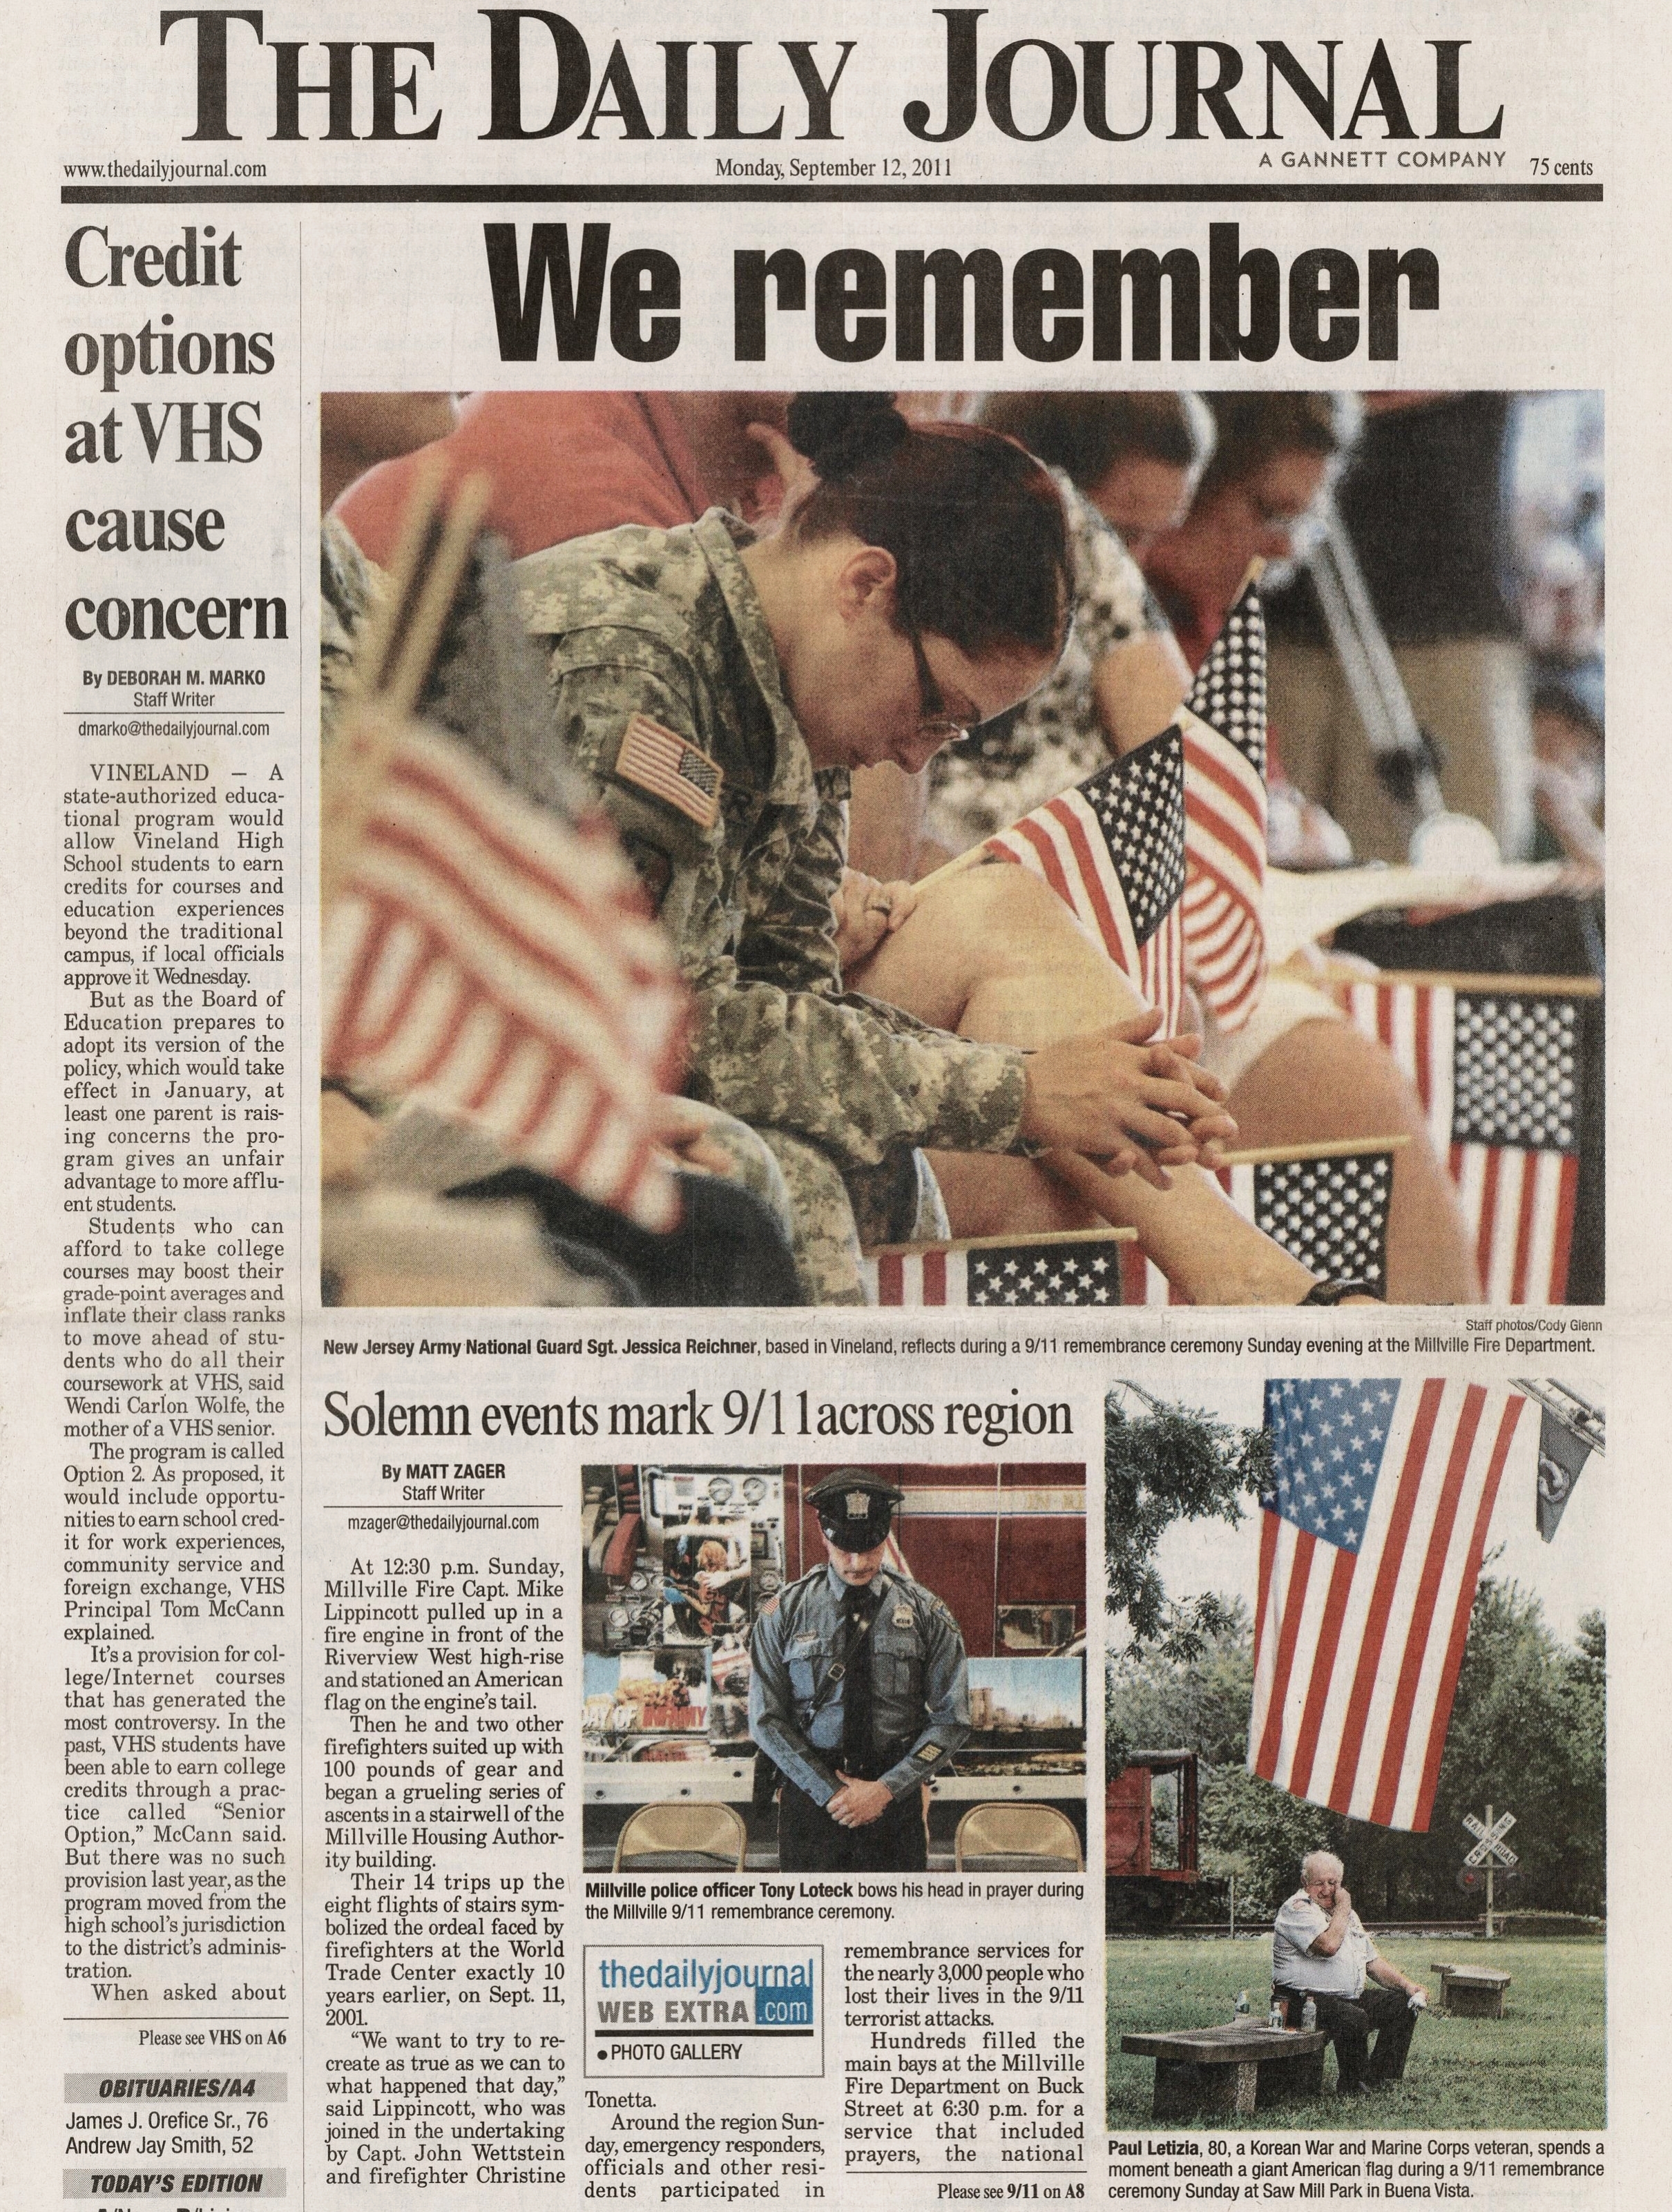  10-year anniversary of September 11 attacks remembered September 12 2011 /  The Daily Journal  